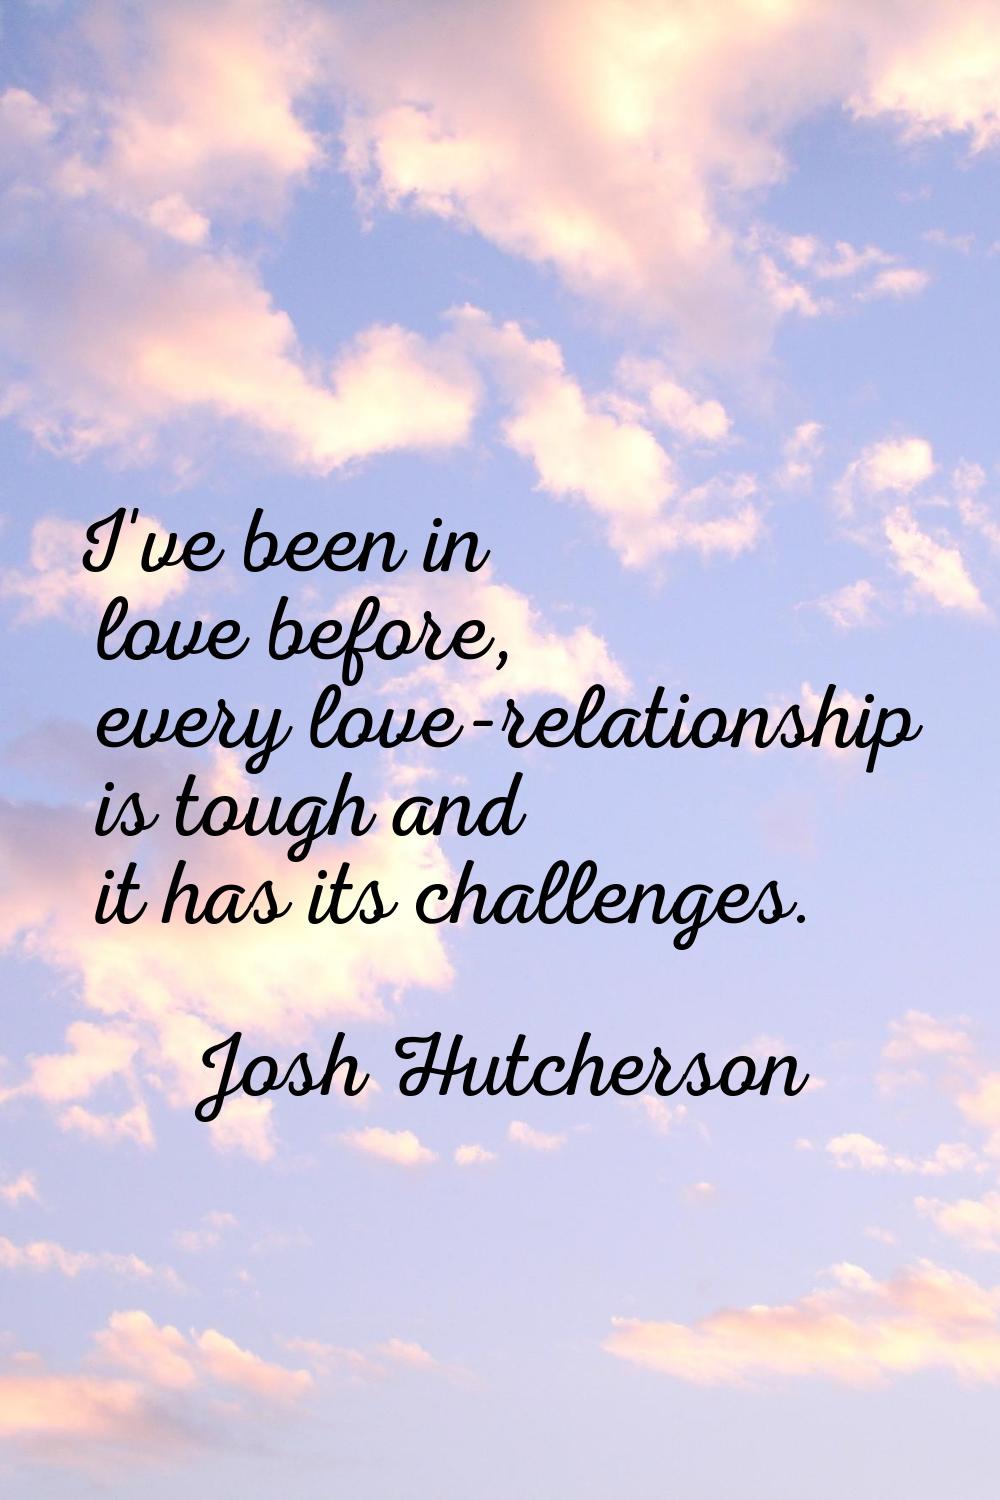 I've been in love before, every love-relationship is tough and it has its challenges.